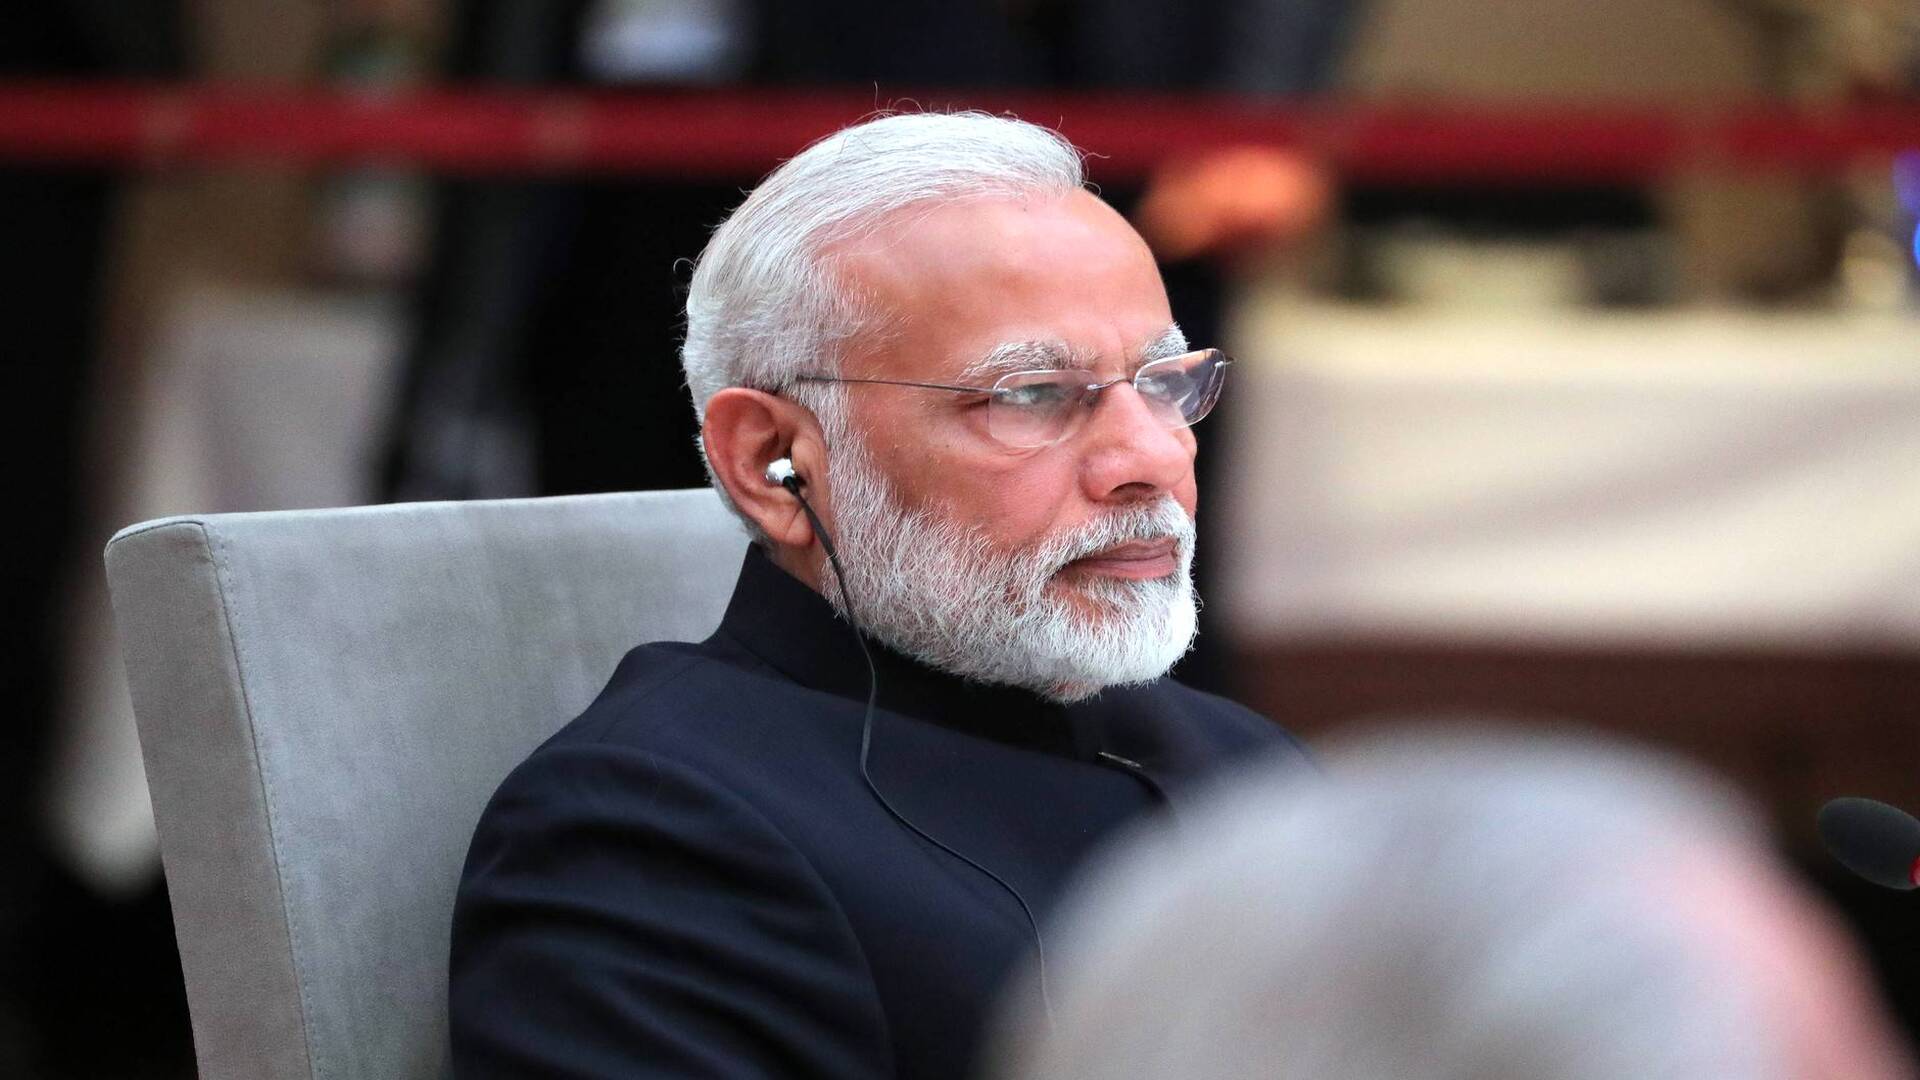 PM Modi requests MPs to not create ruckus ahead of the budget session